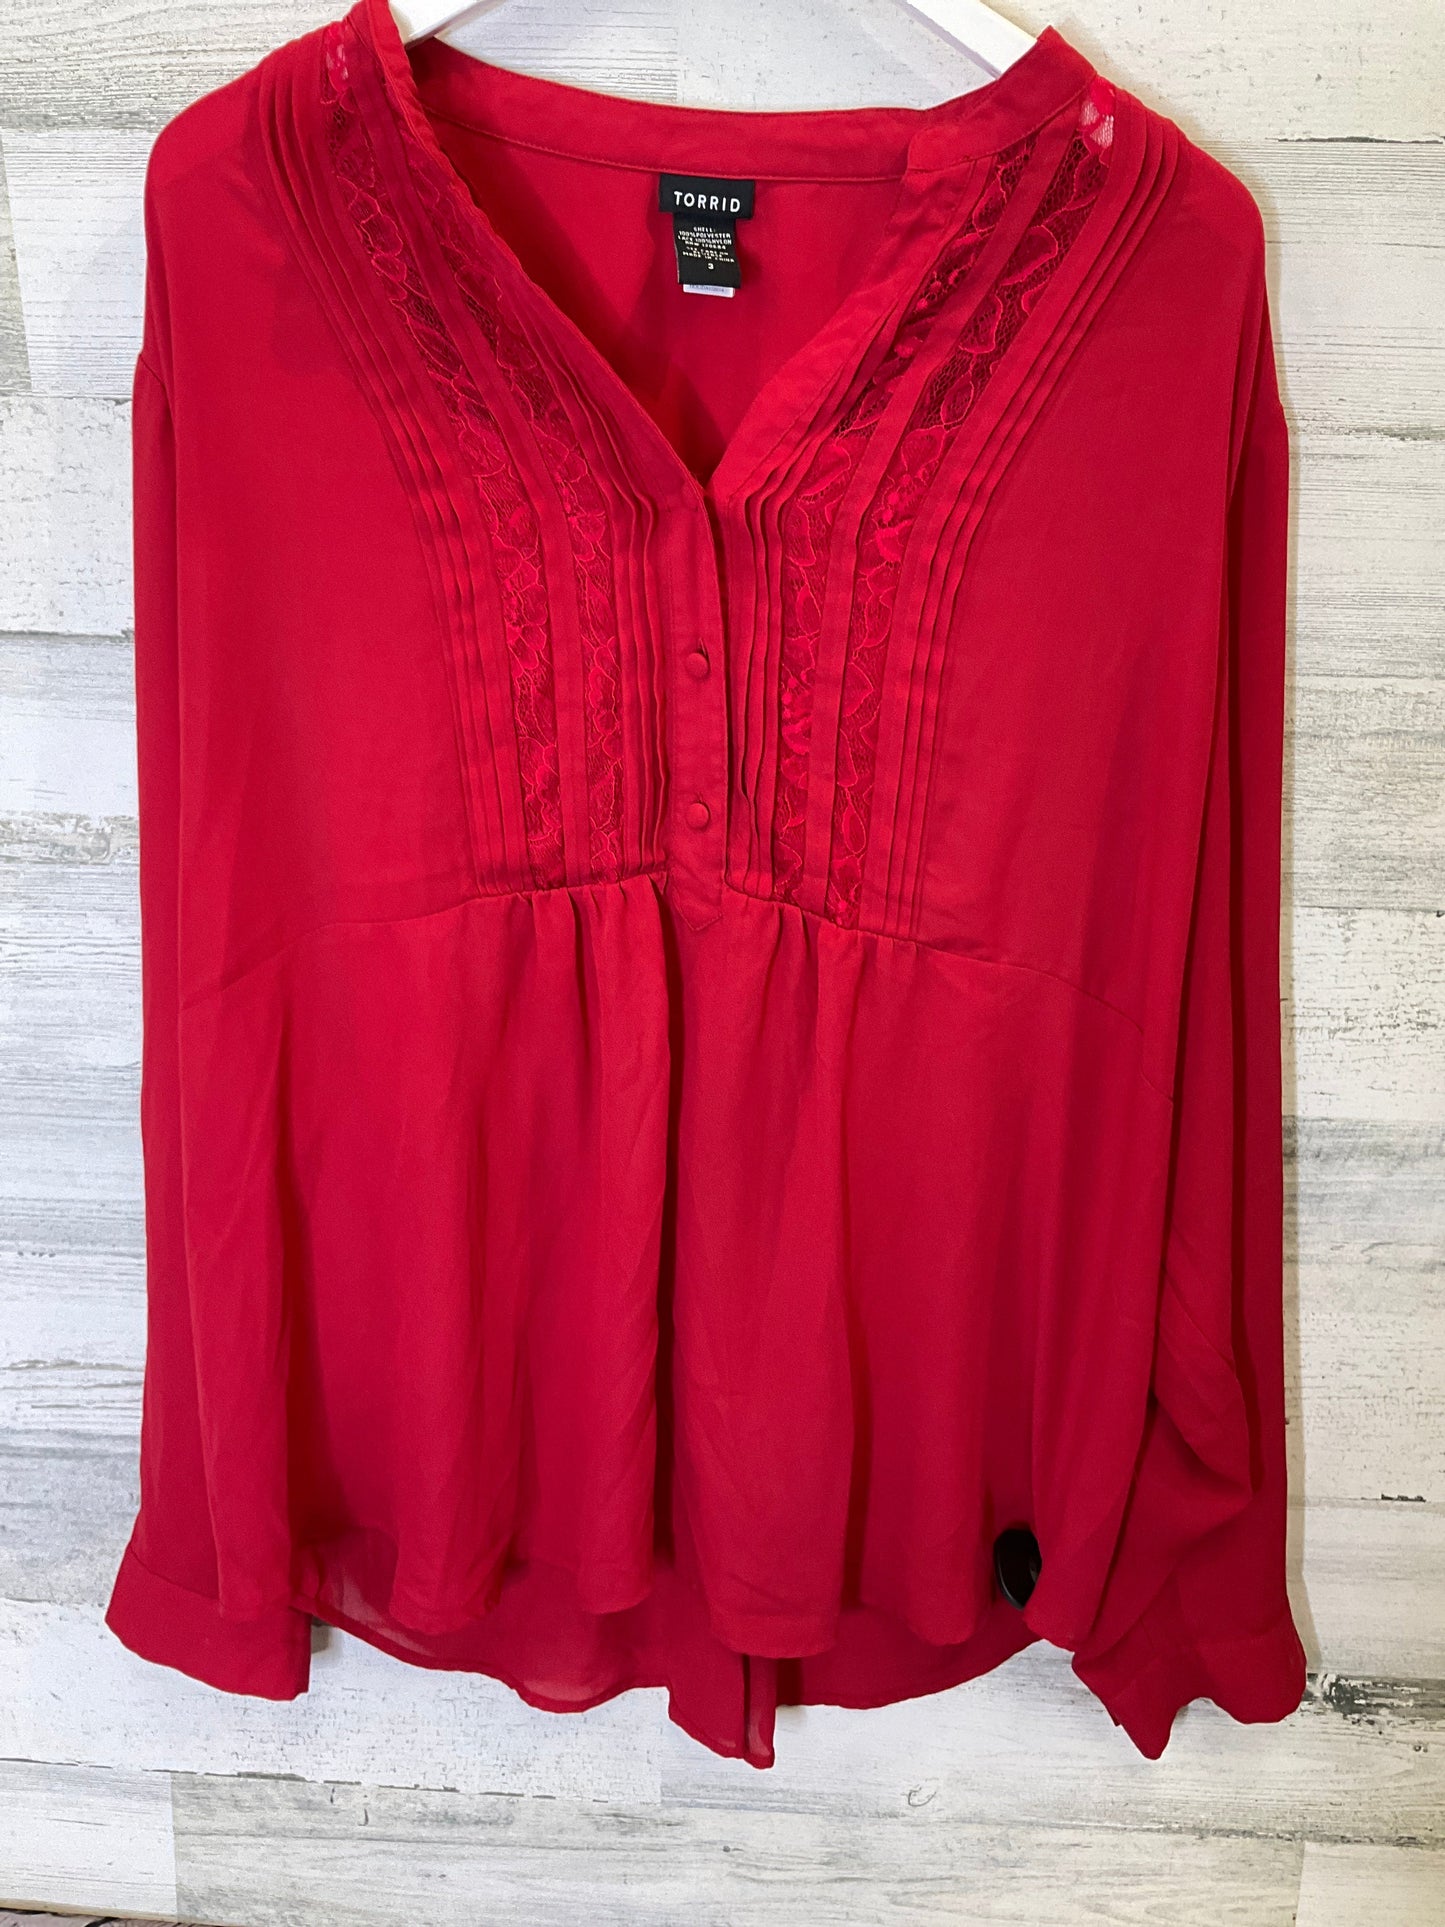 Red Top Long Sleeve Torrid, Size 3x